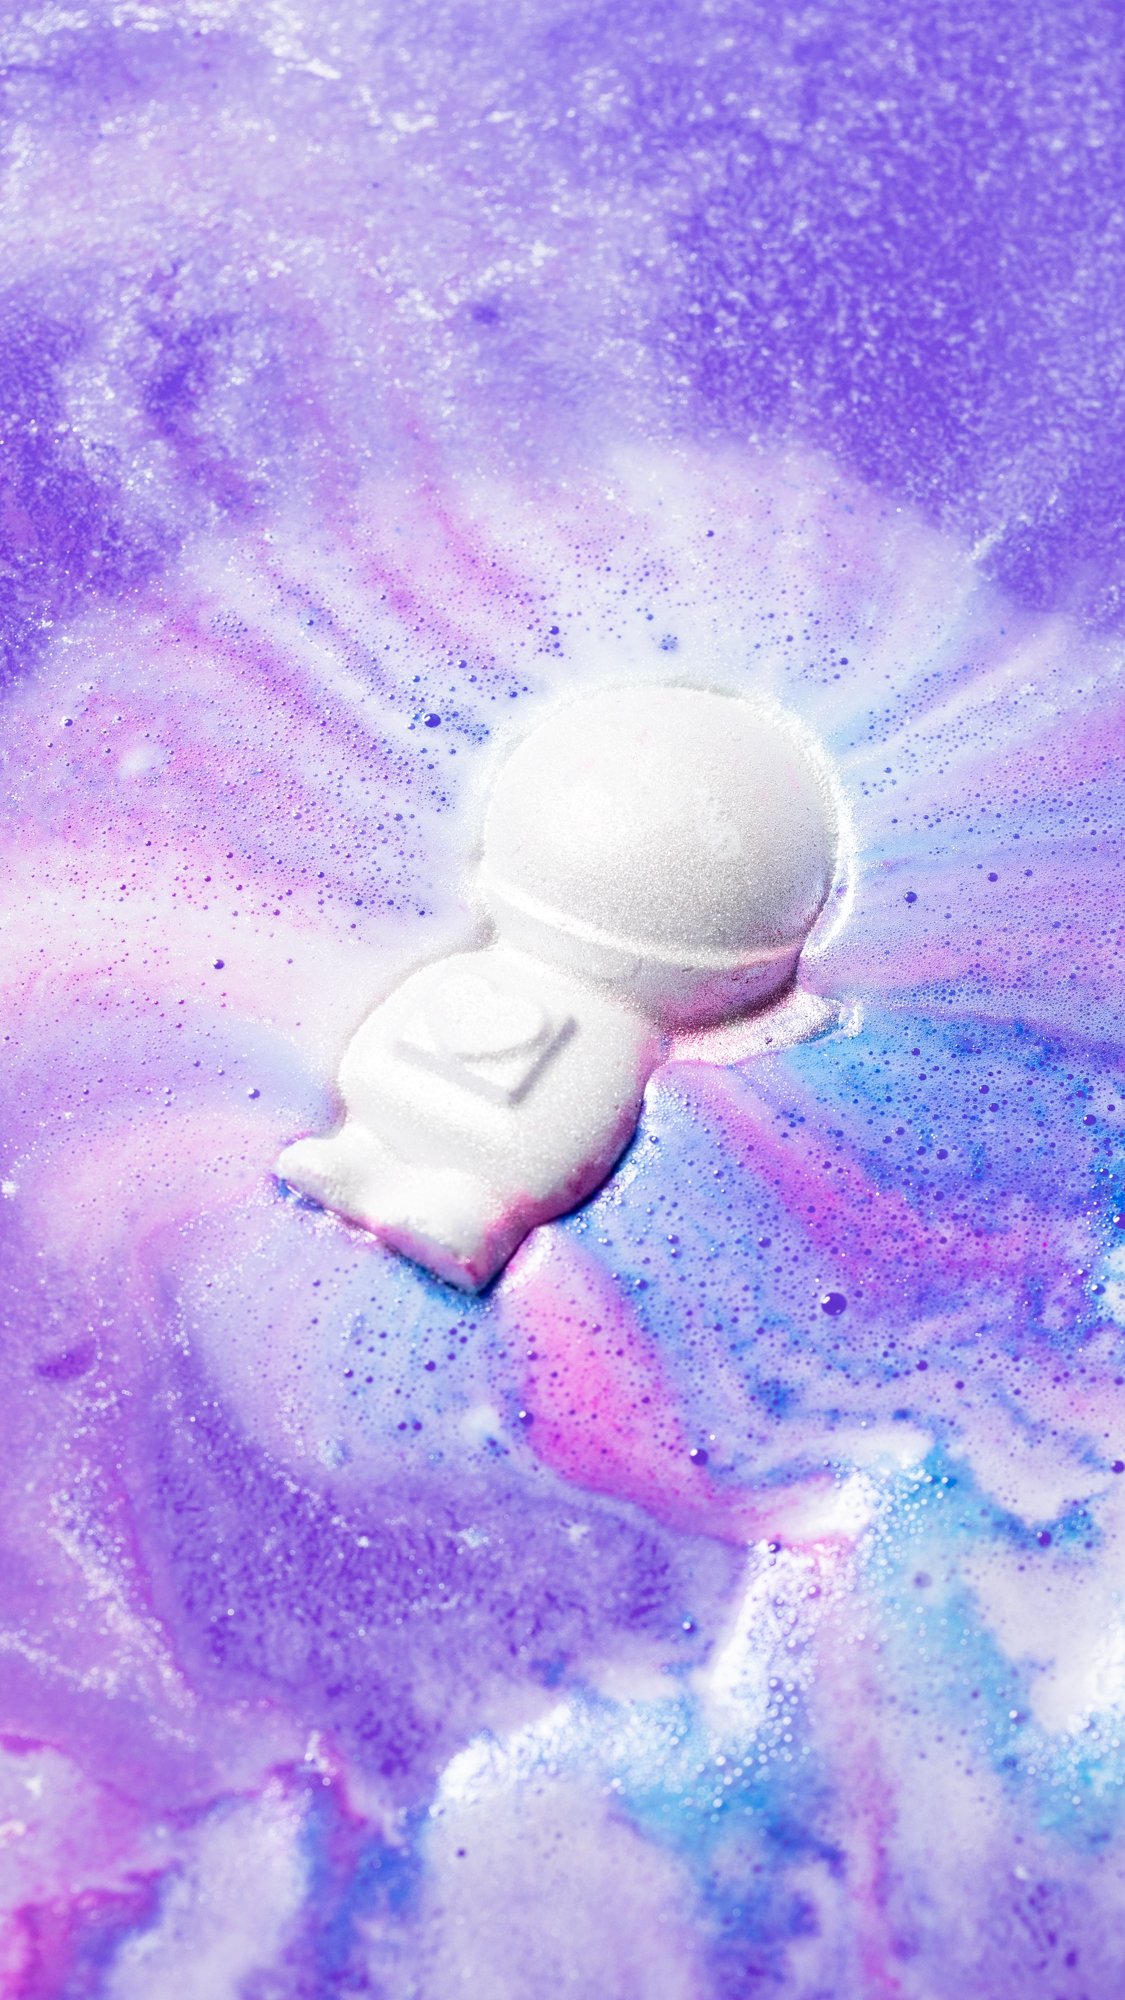 The Bath Bomb sits in the bath surrounded by foamy swirls of pink, purple and blue.